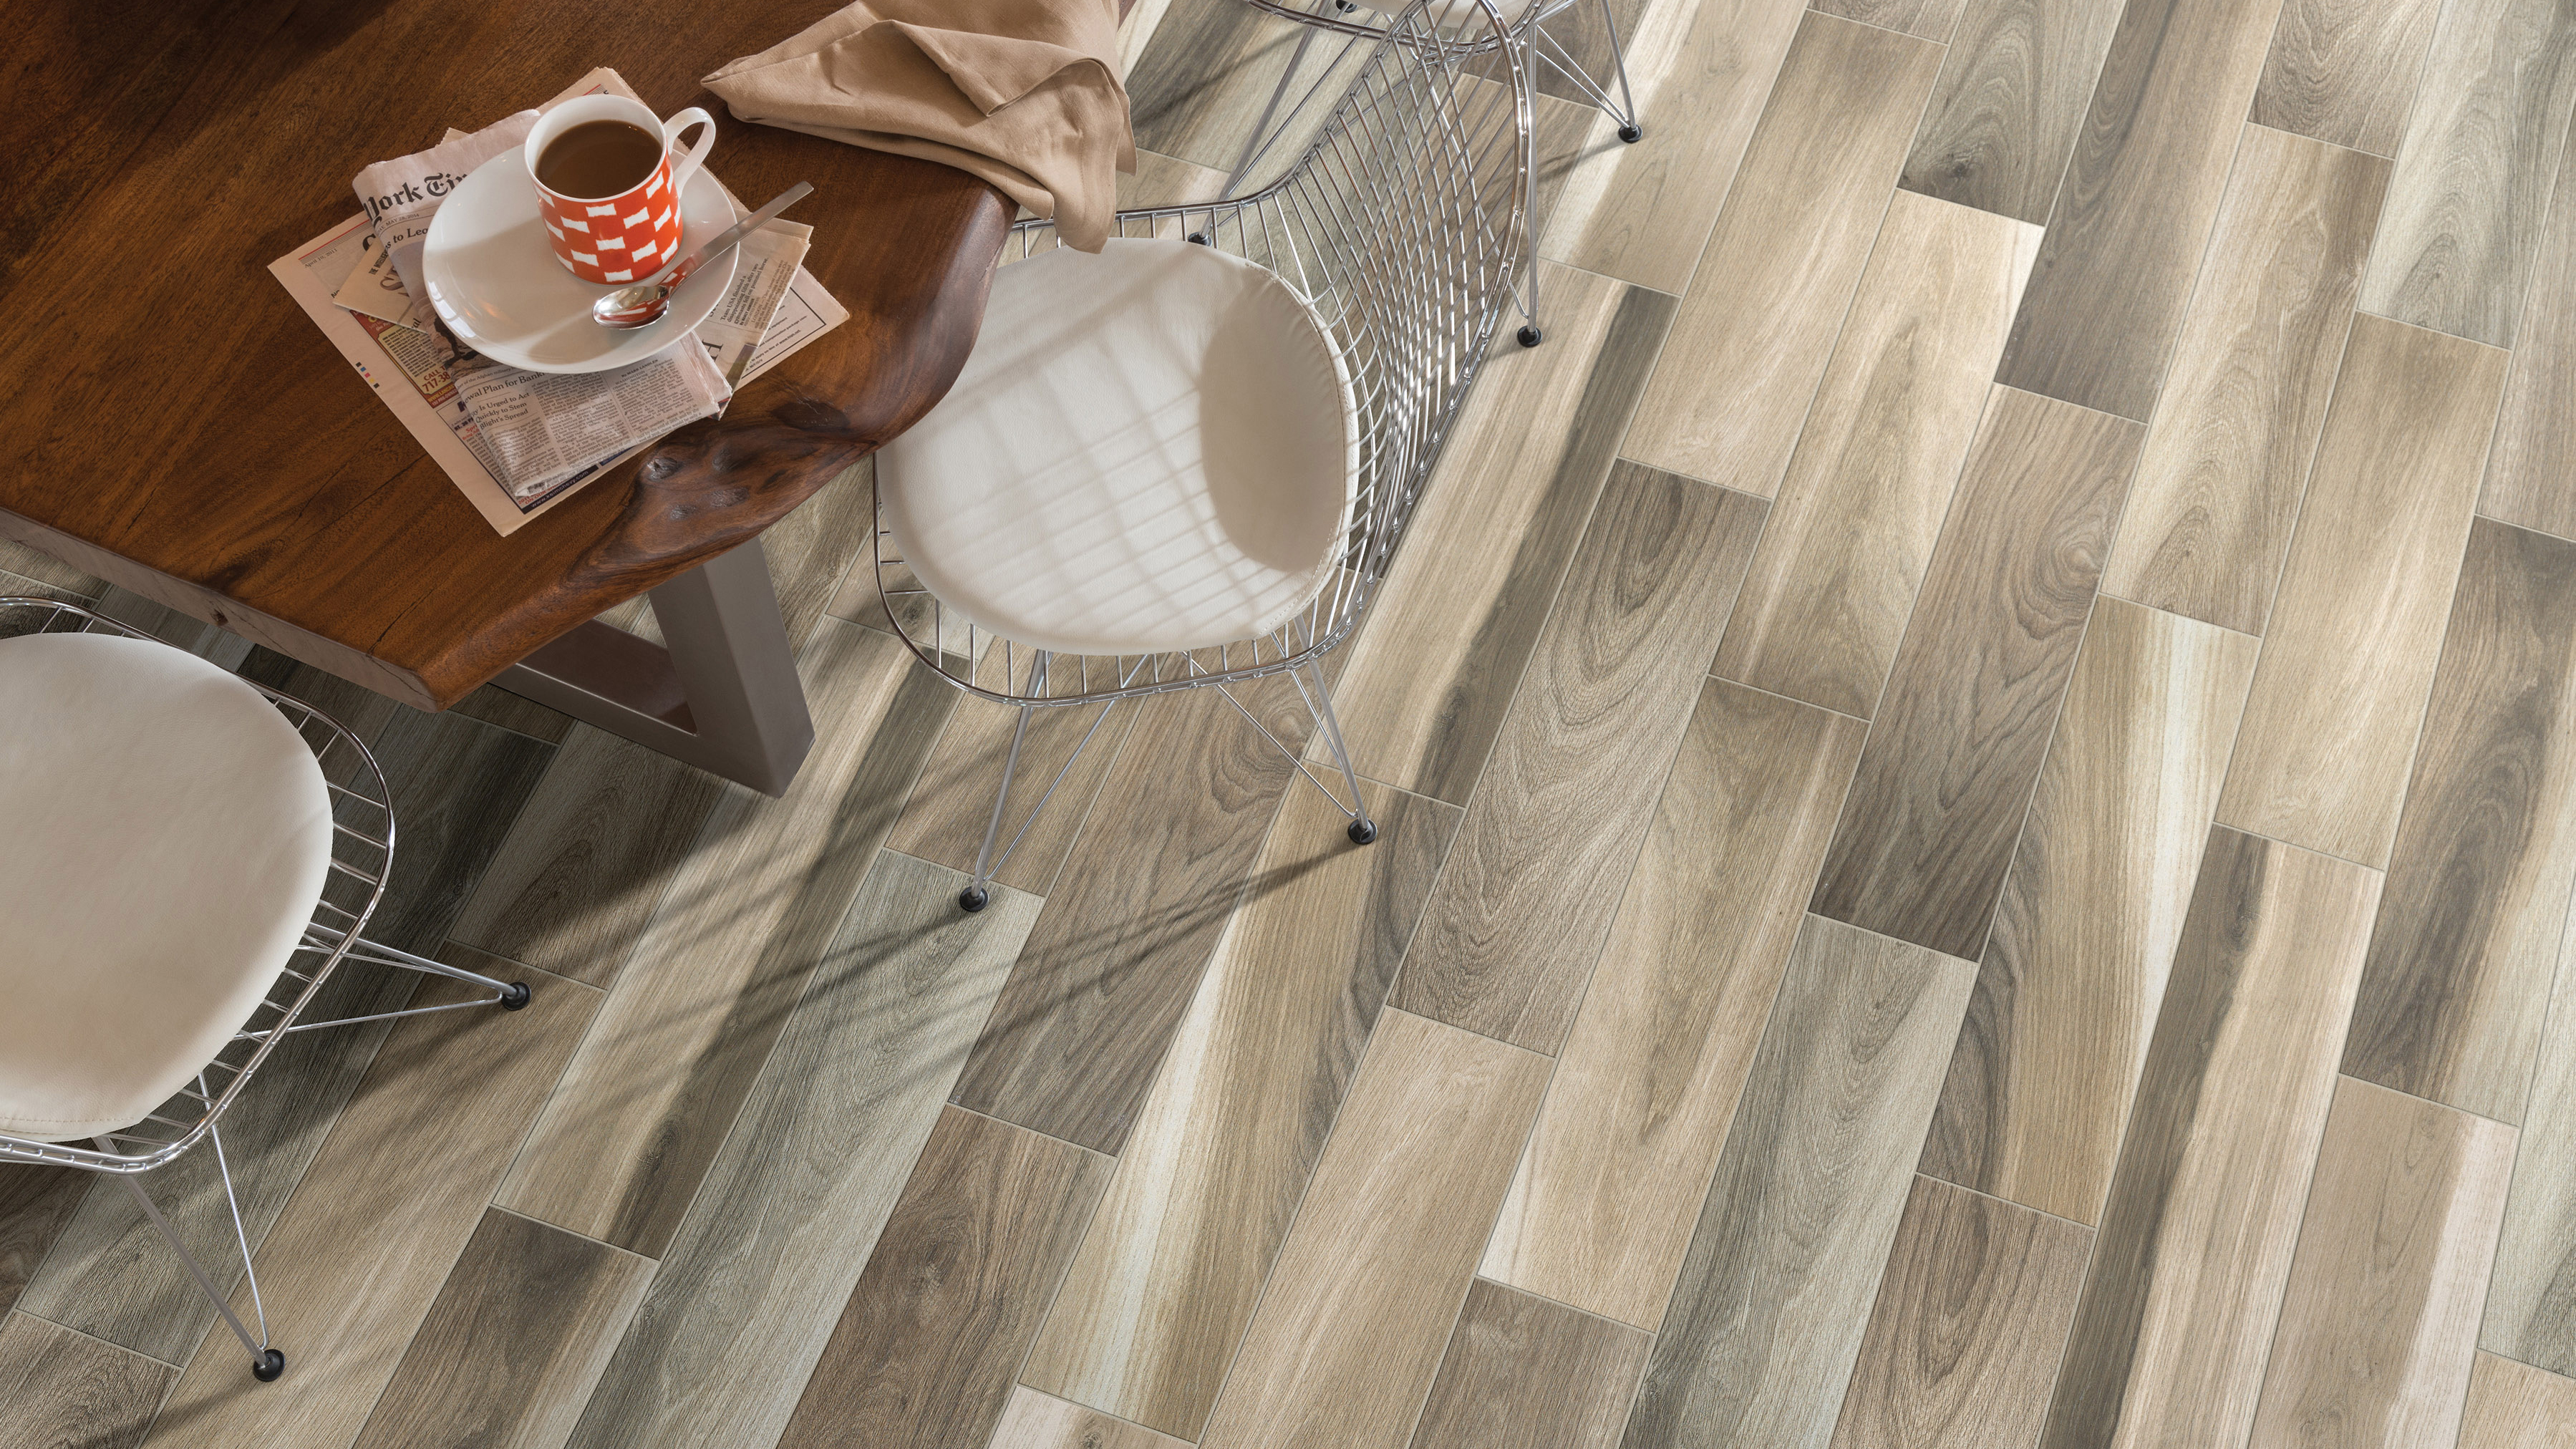 Wood-look tile flooring in a dining area, installation services available.